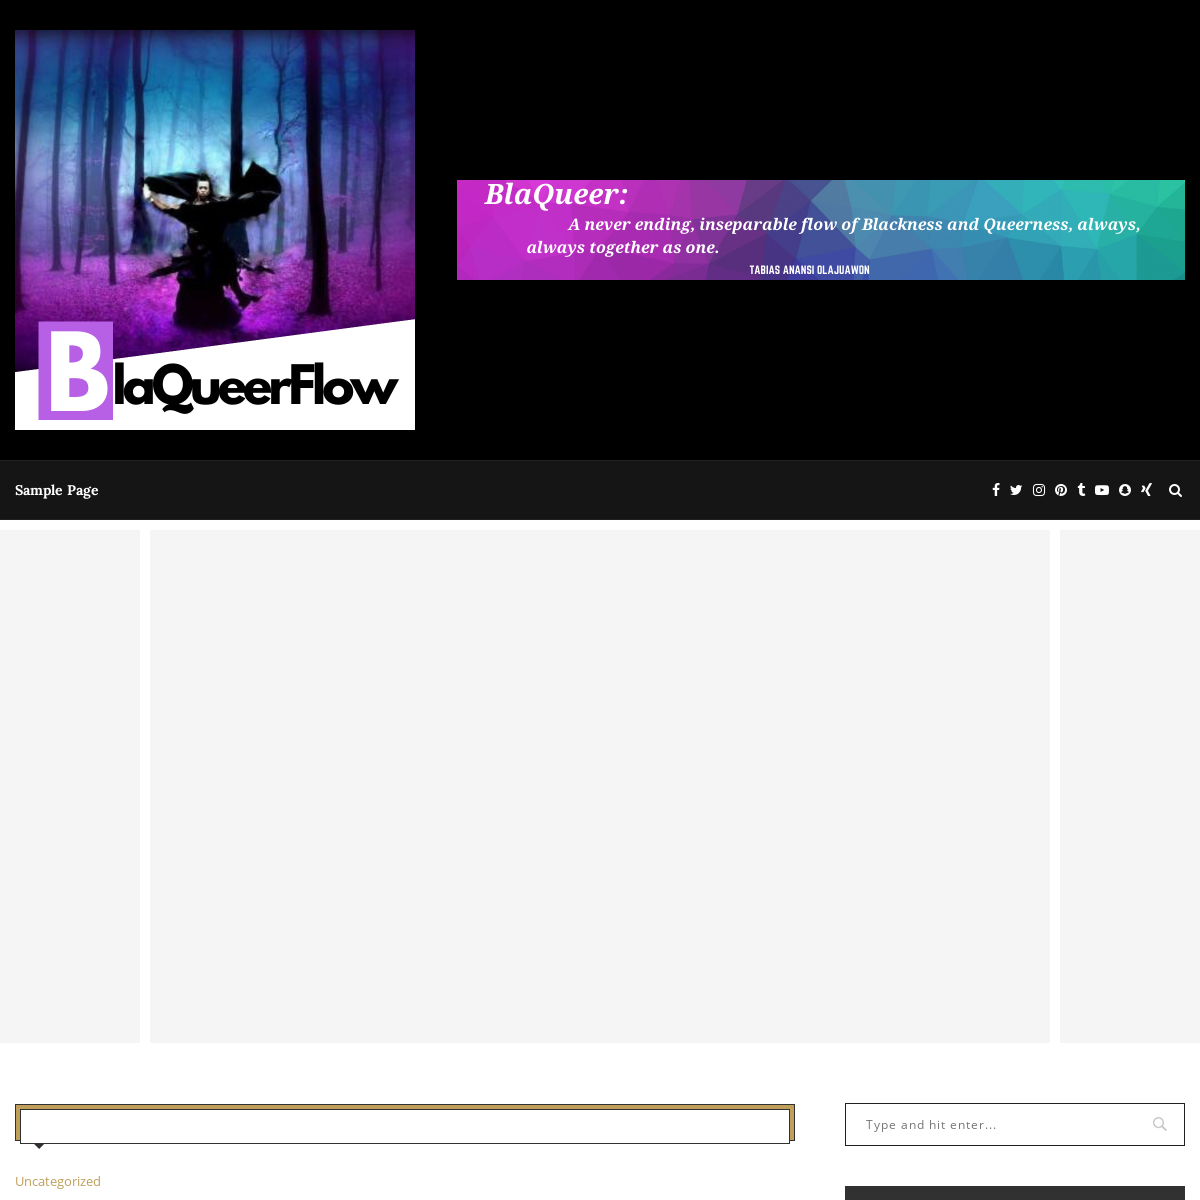 A complete backup of blaqueerflow.com